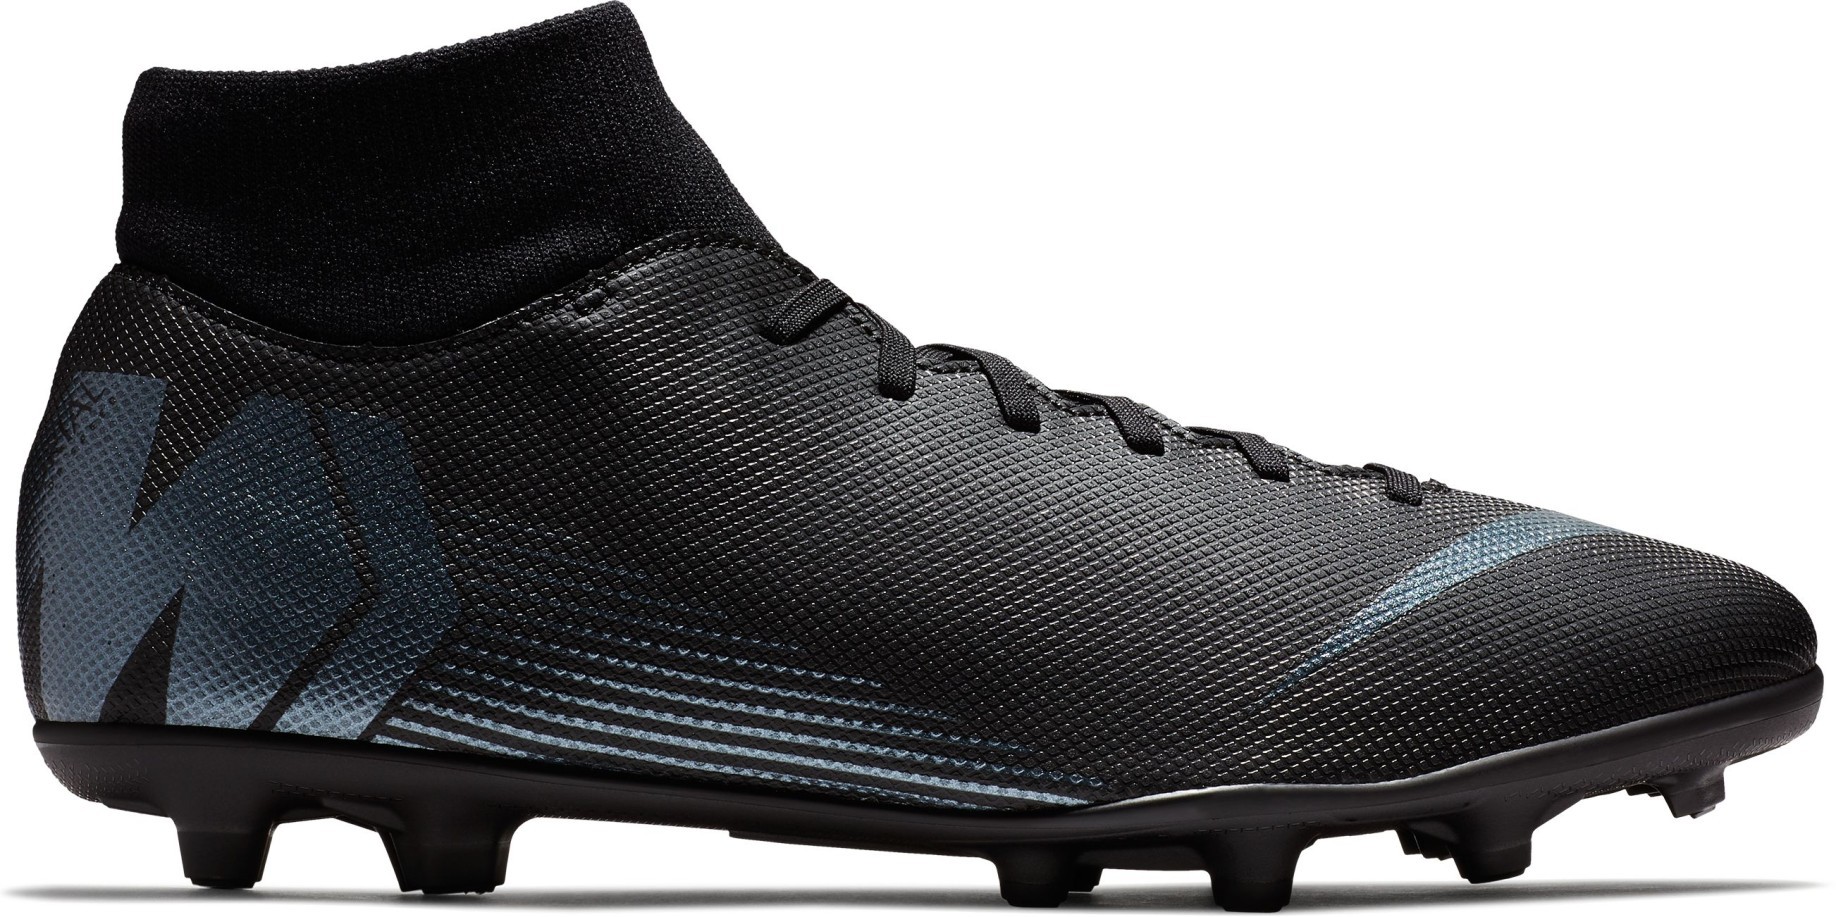 Soccer shoes Nike Mercurial Superfly VI 